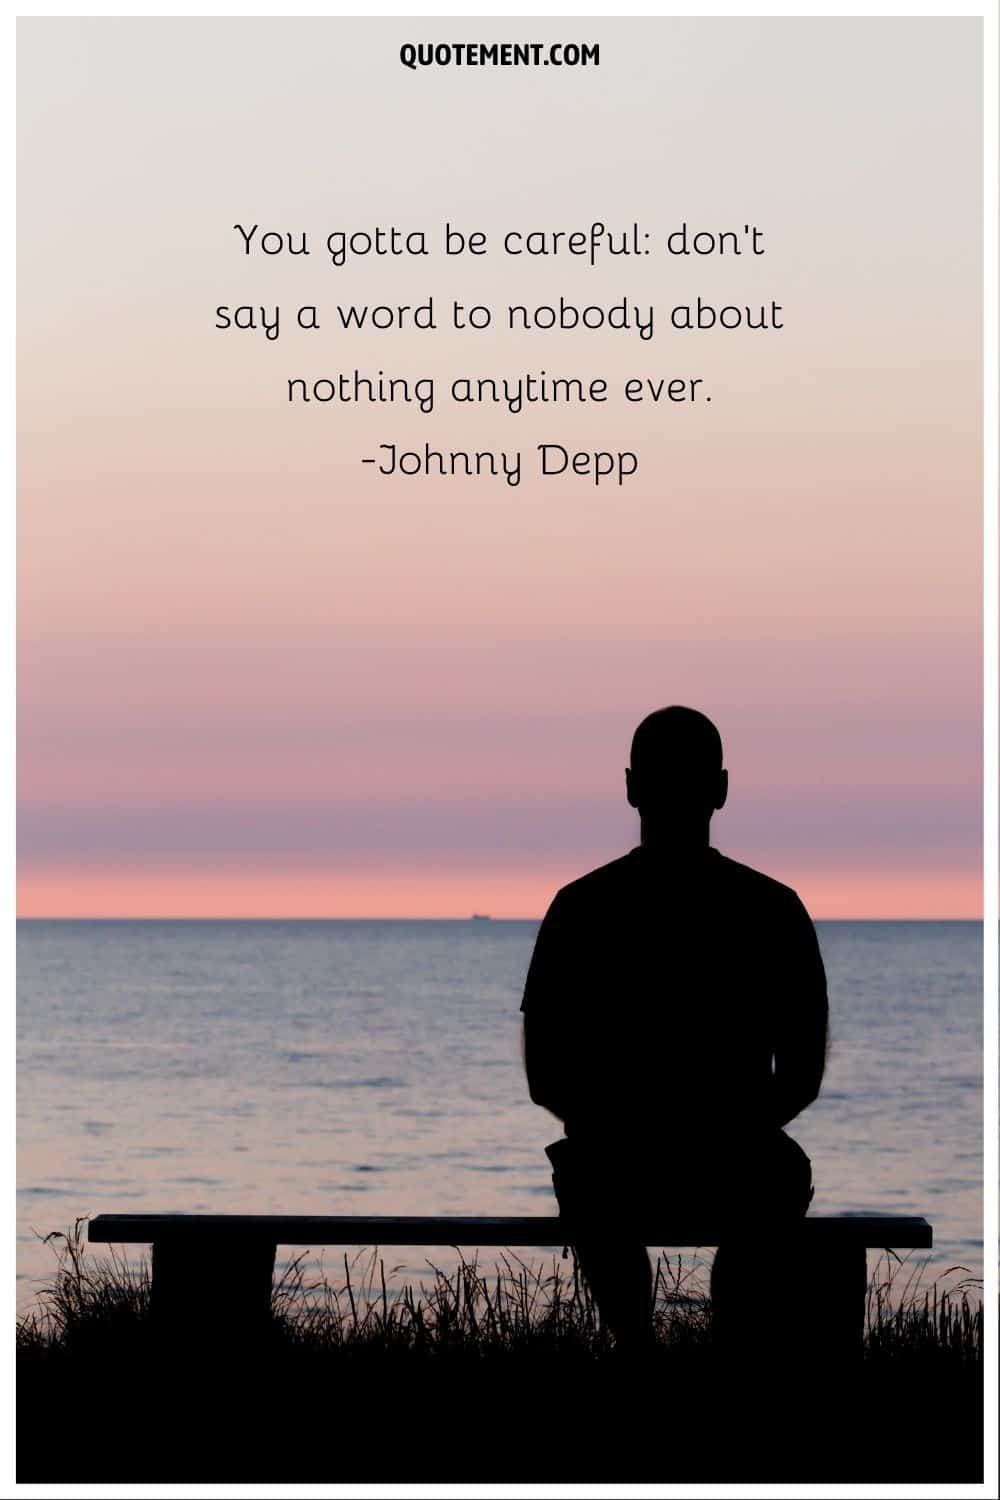 “You gotta be careful don't say a word to nobody about nothing anytime ever.” ― Johnny Depp